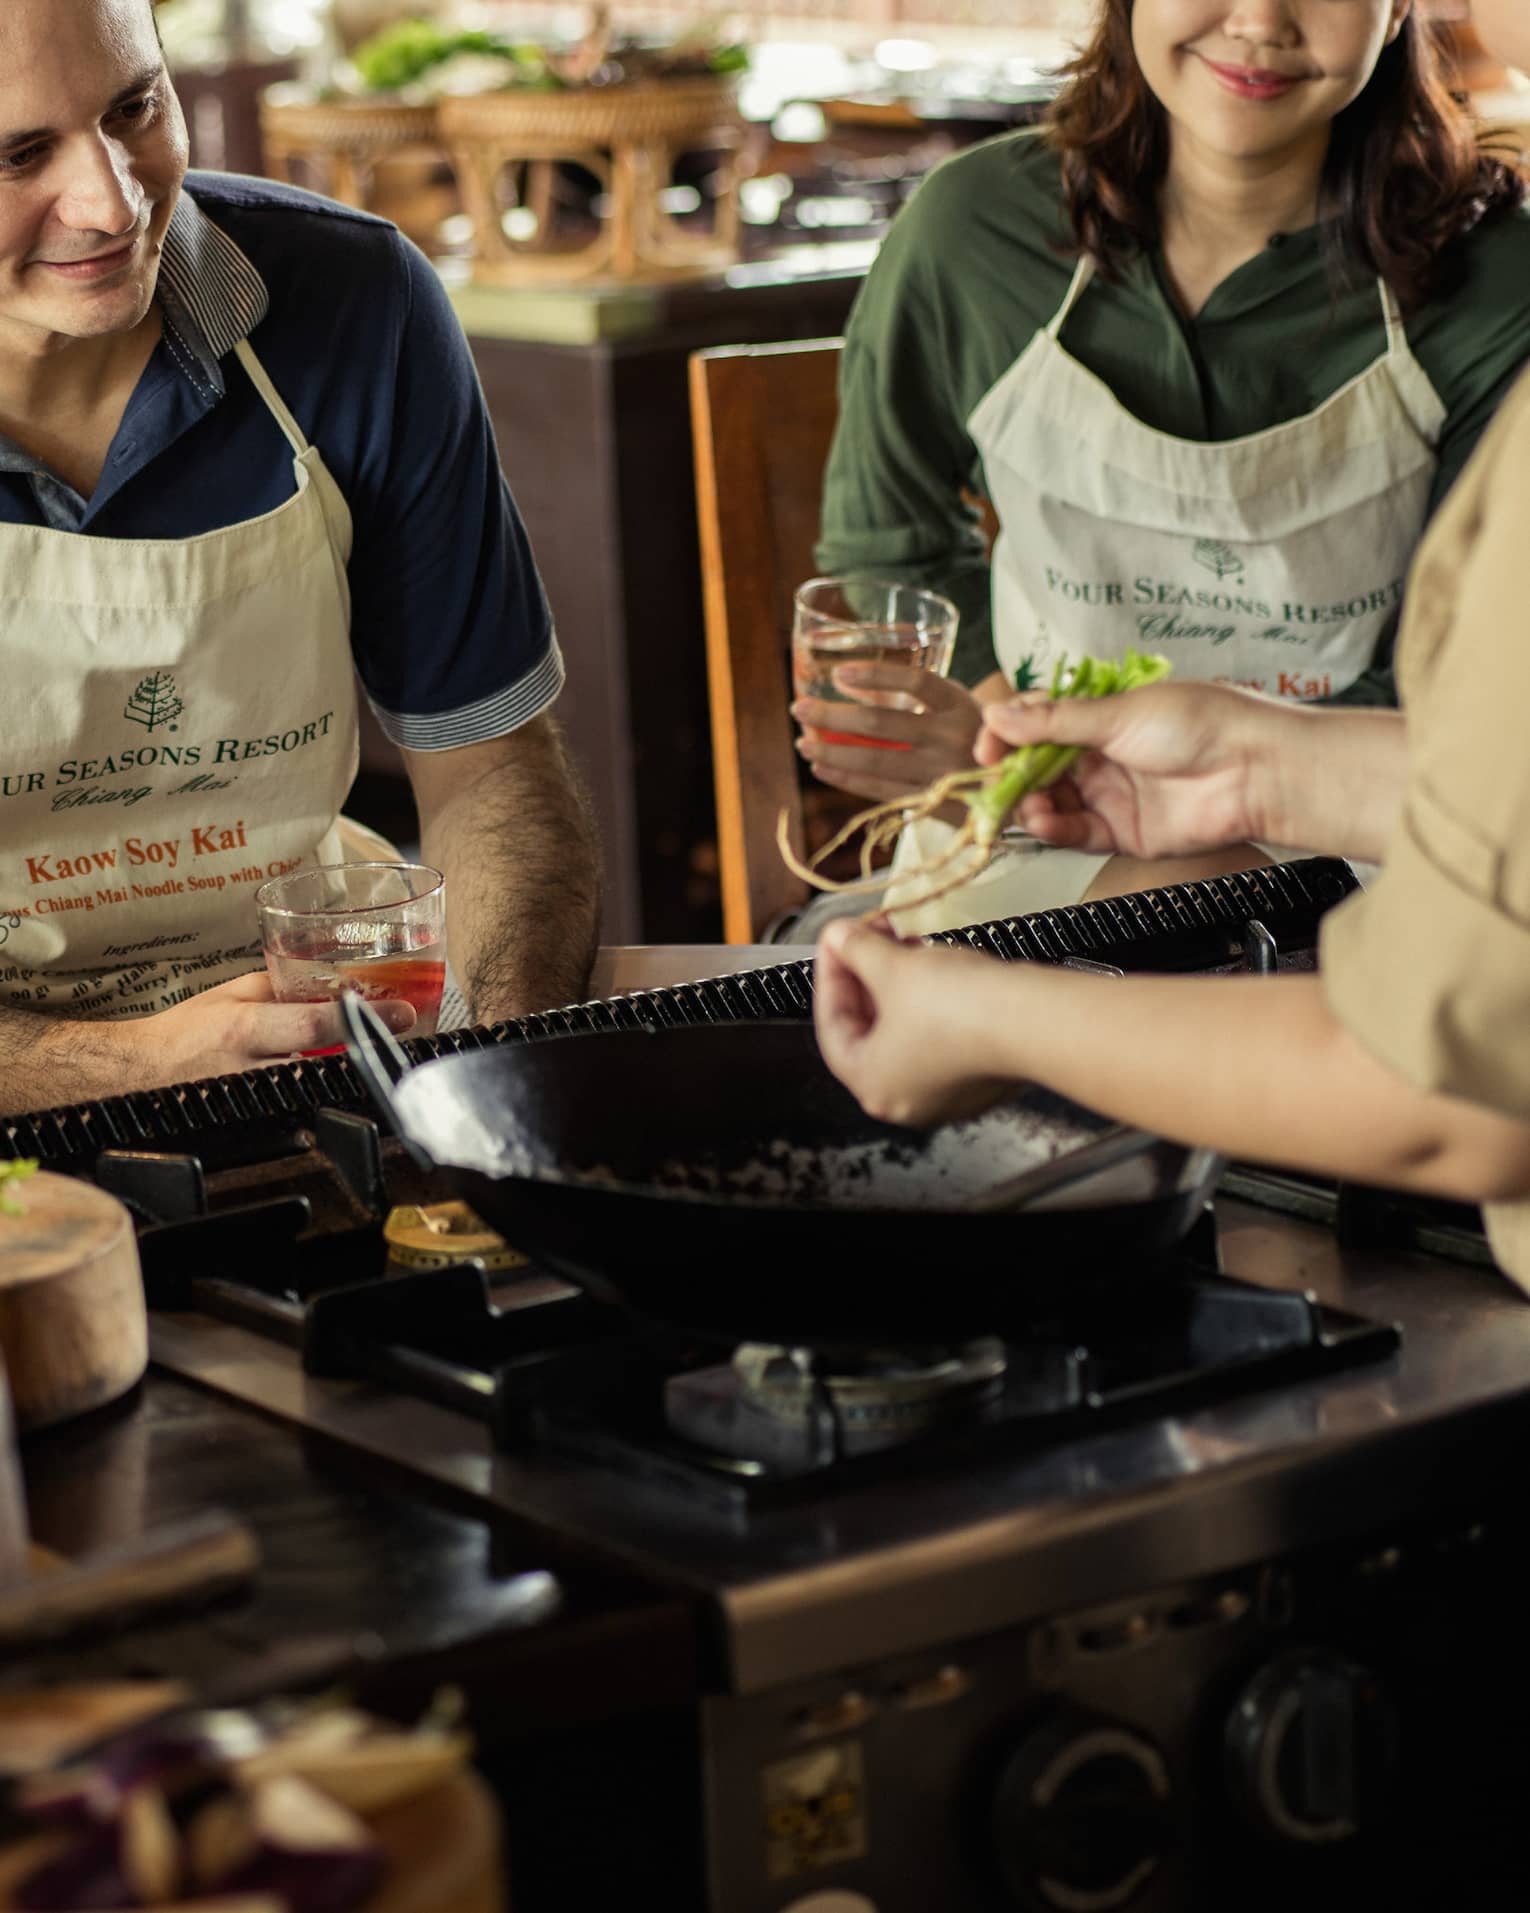 Three guests in aprons sit on stool in front of large wok, chef during Thai cooking class